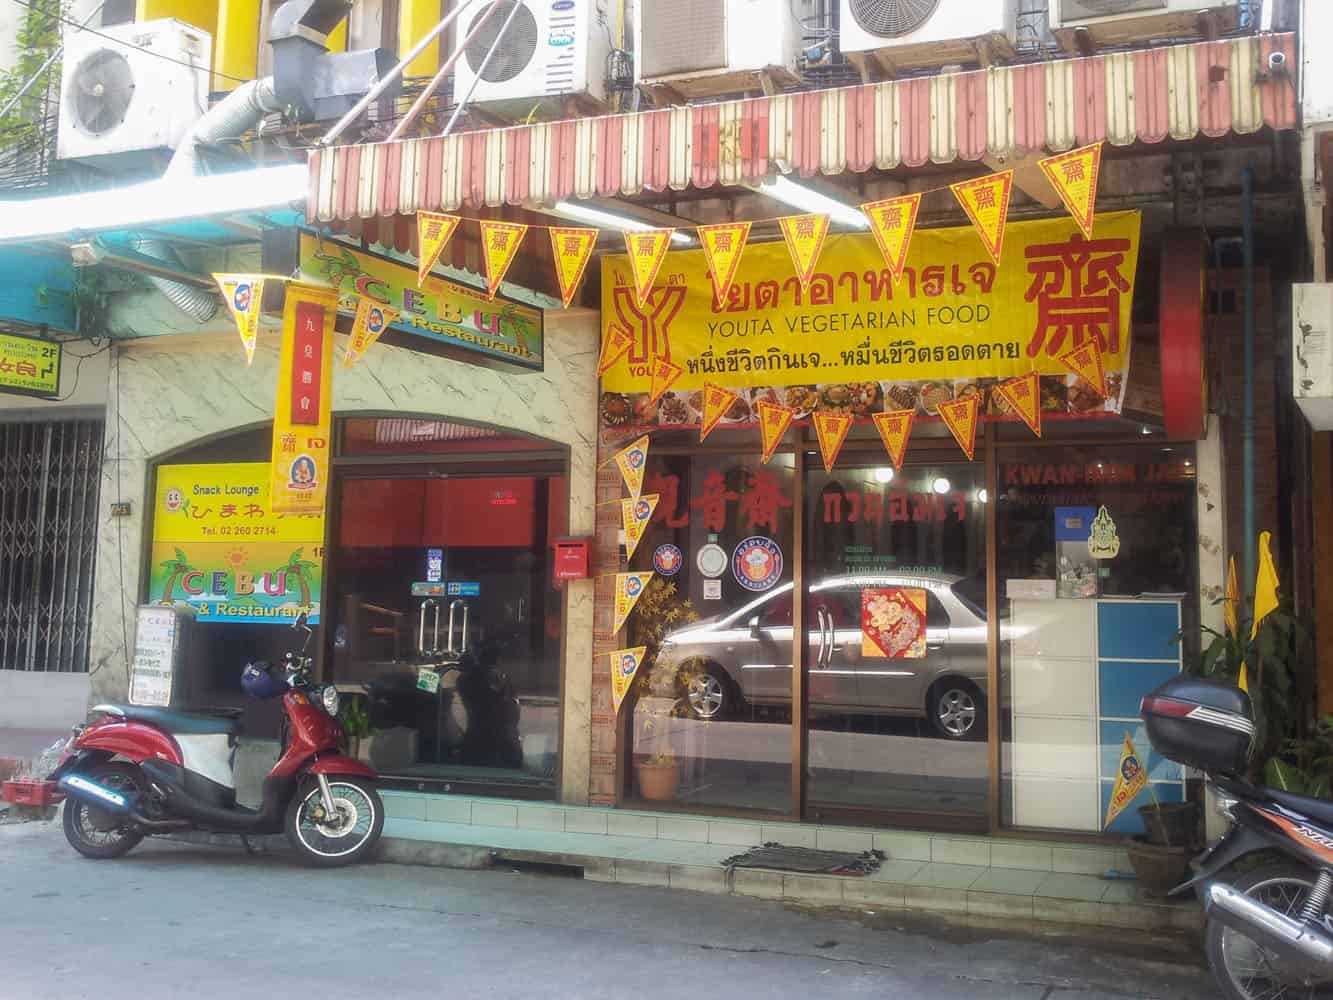 Jay (vegan) eateries are easily distinguished by the yellow flags with เจ in red